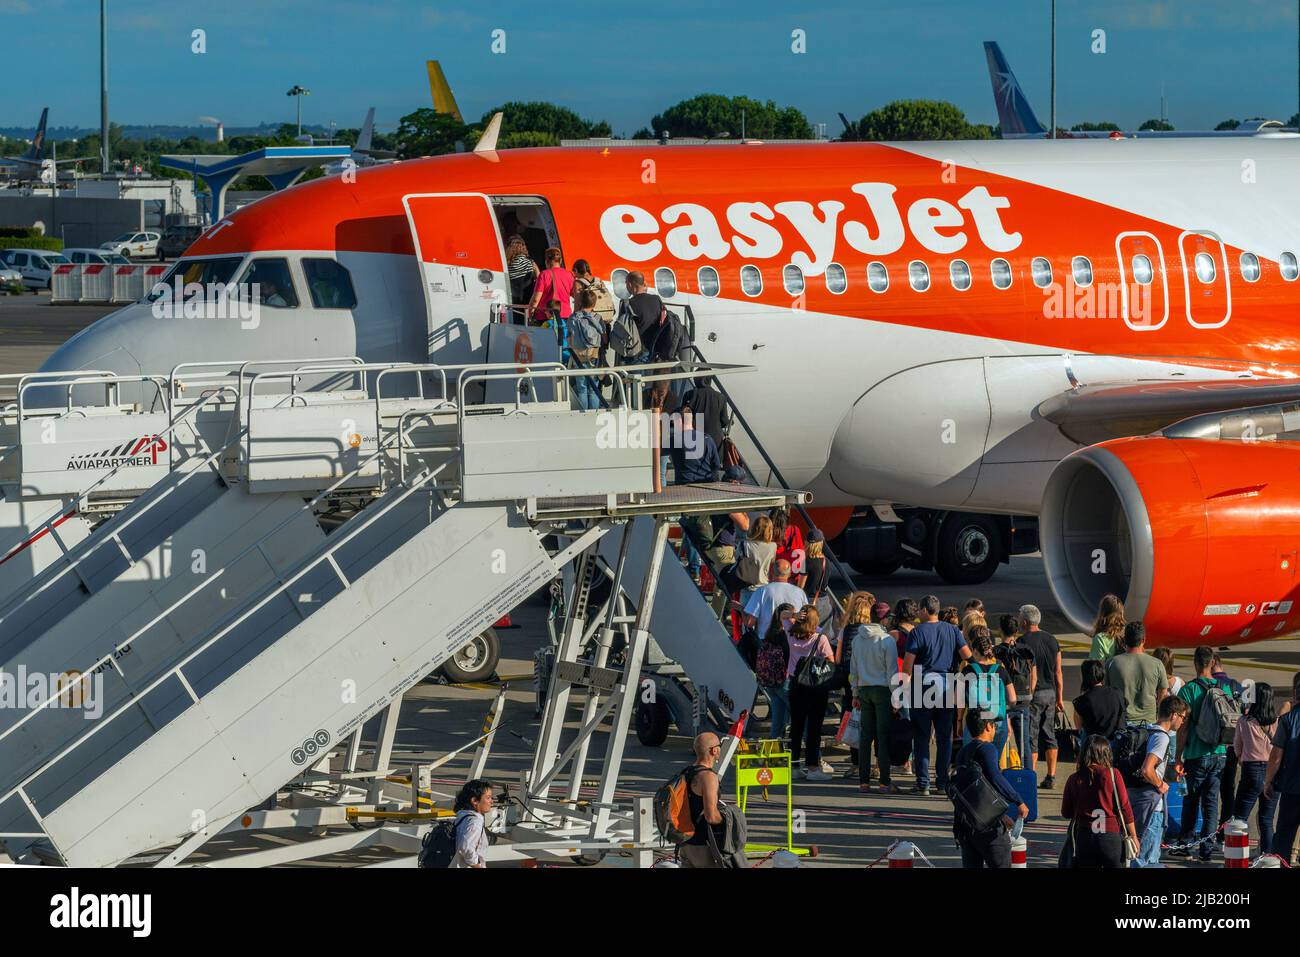 Close profile view of an Easy Jet Airbus A320 with boarding passengers Stock Photo